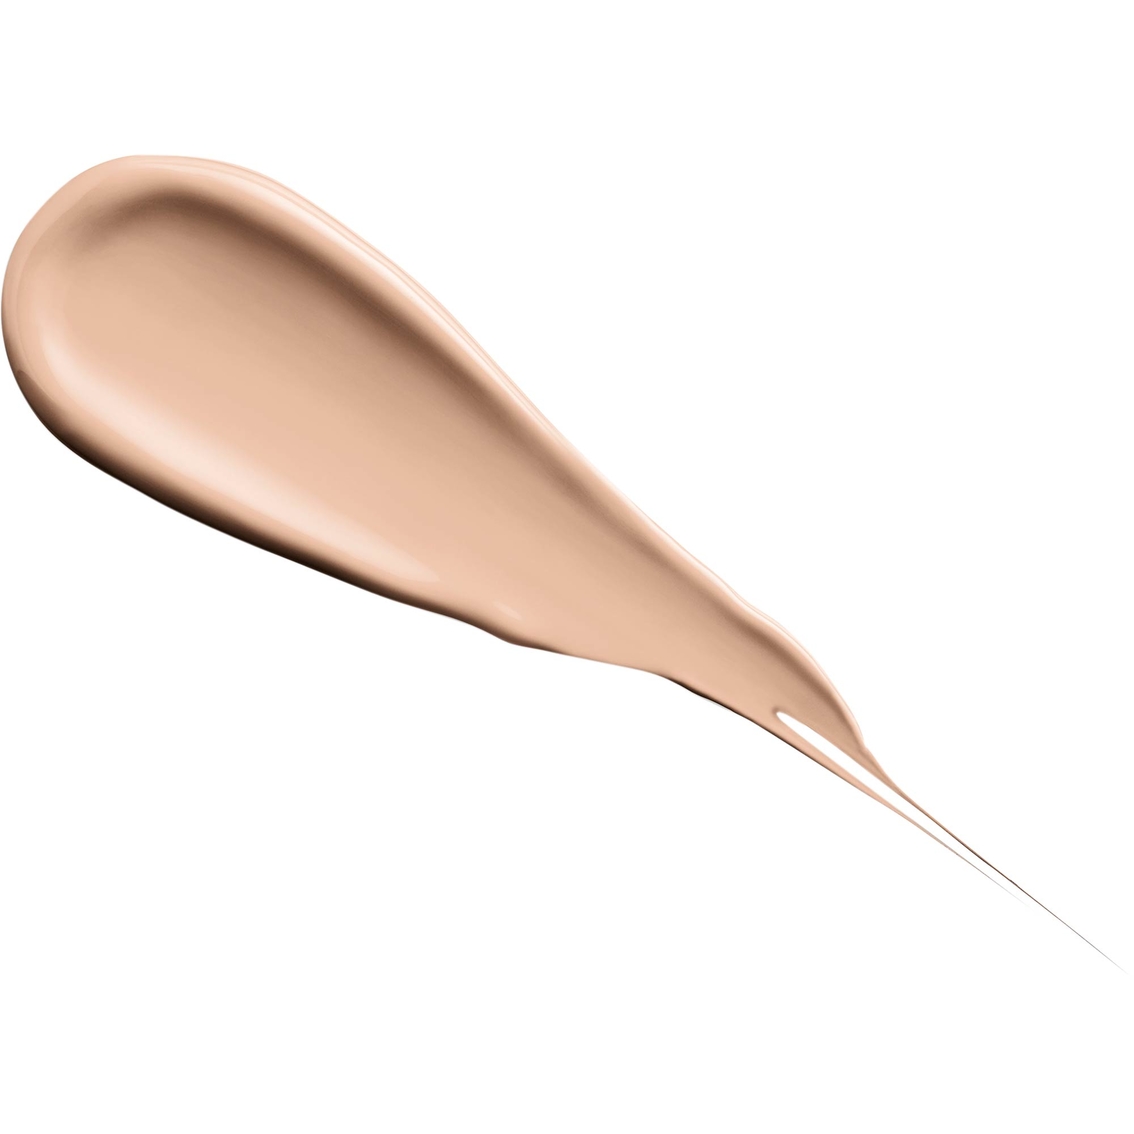 Lancome Teint Idole Ultra Wear High Coverage Concealer - Image 3 of 3